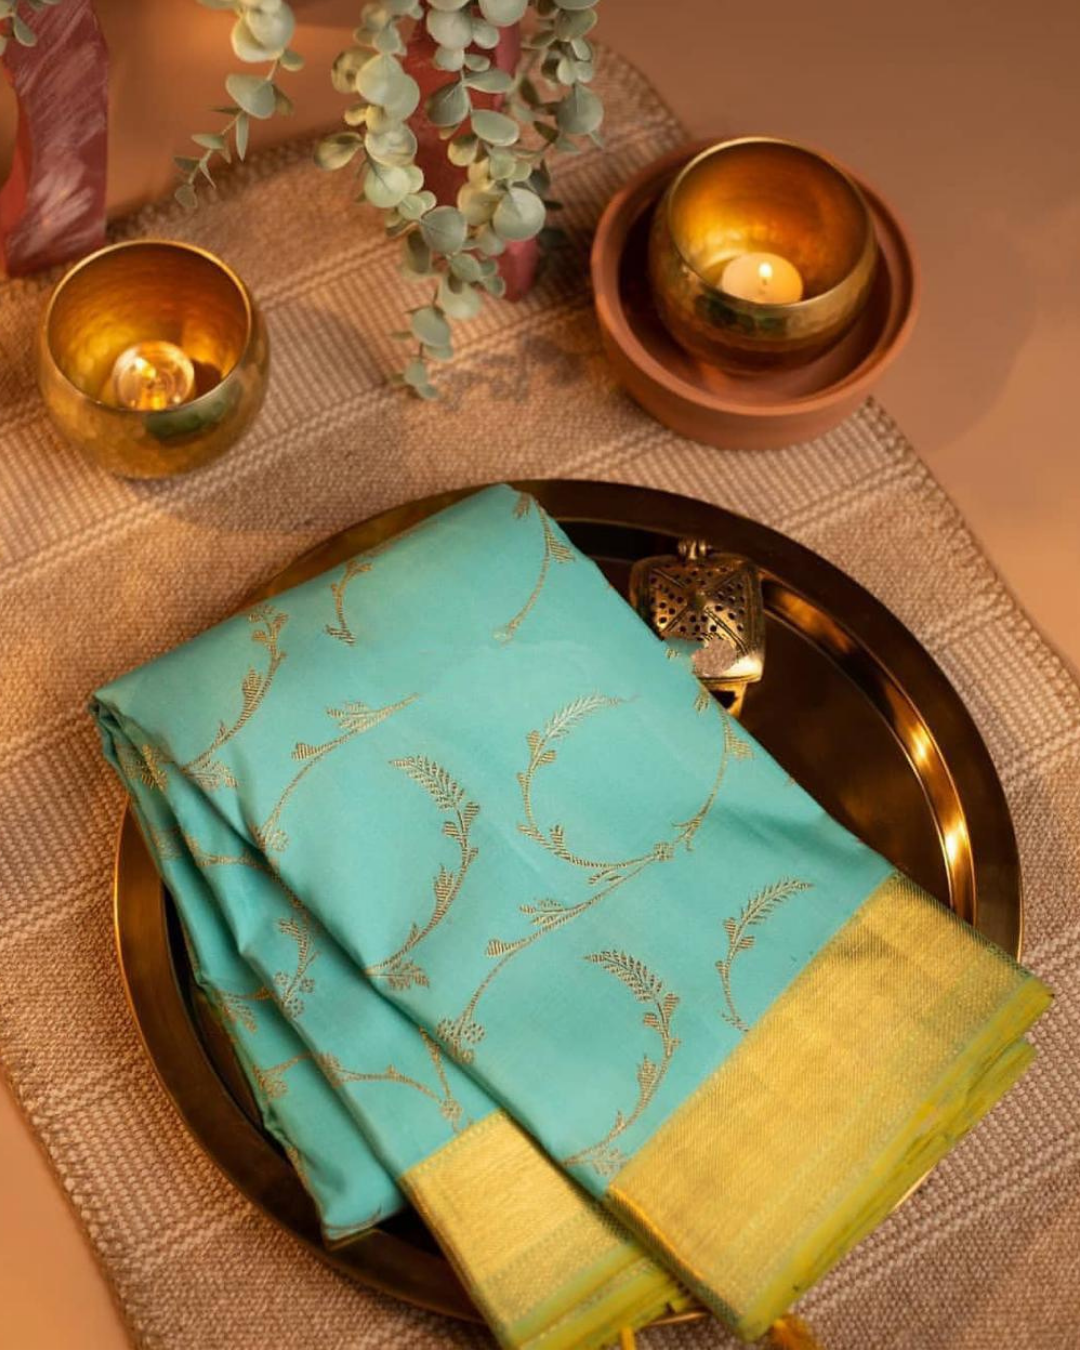 Sky Archaic Treditional Kanchi Soft Silk Saree With Attached Blouse